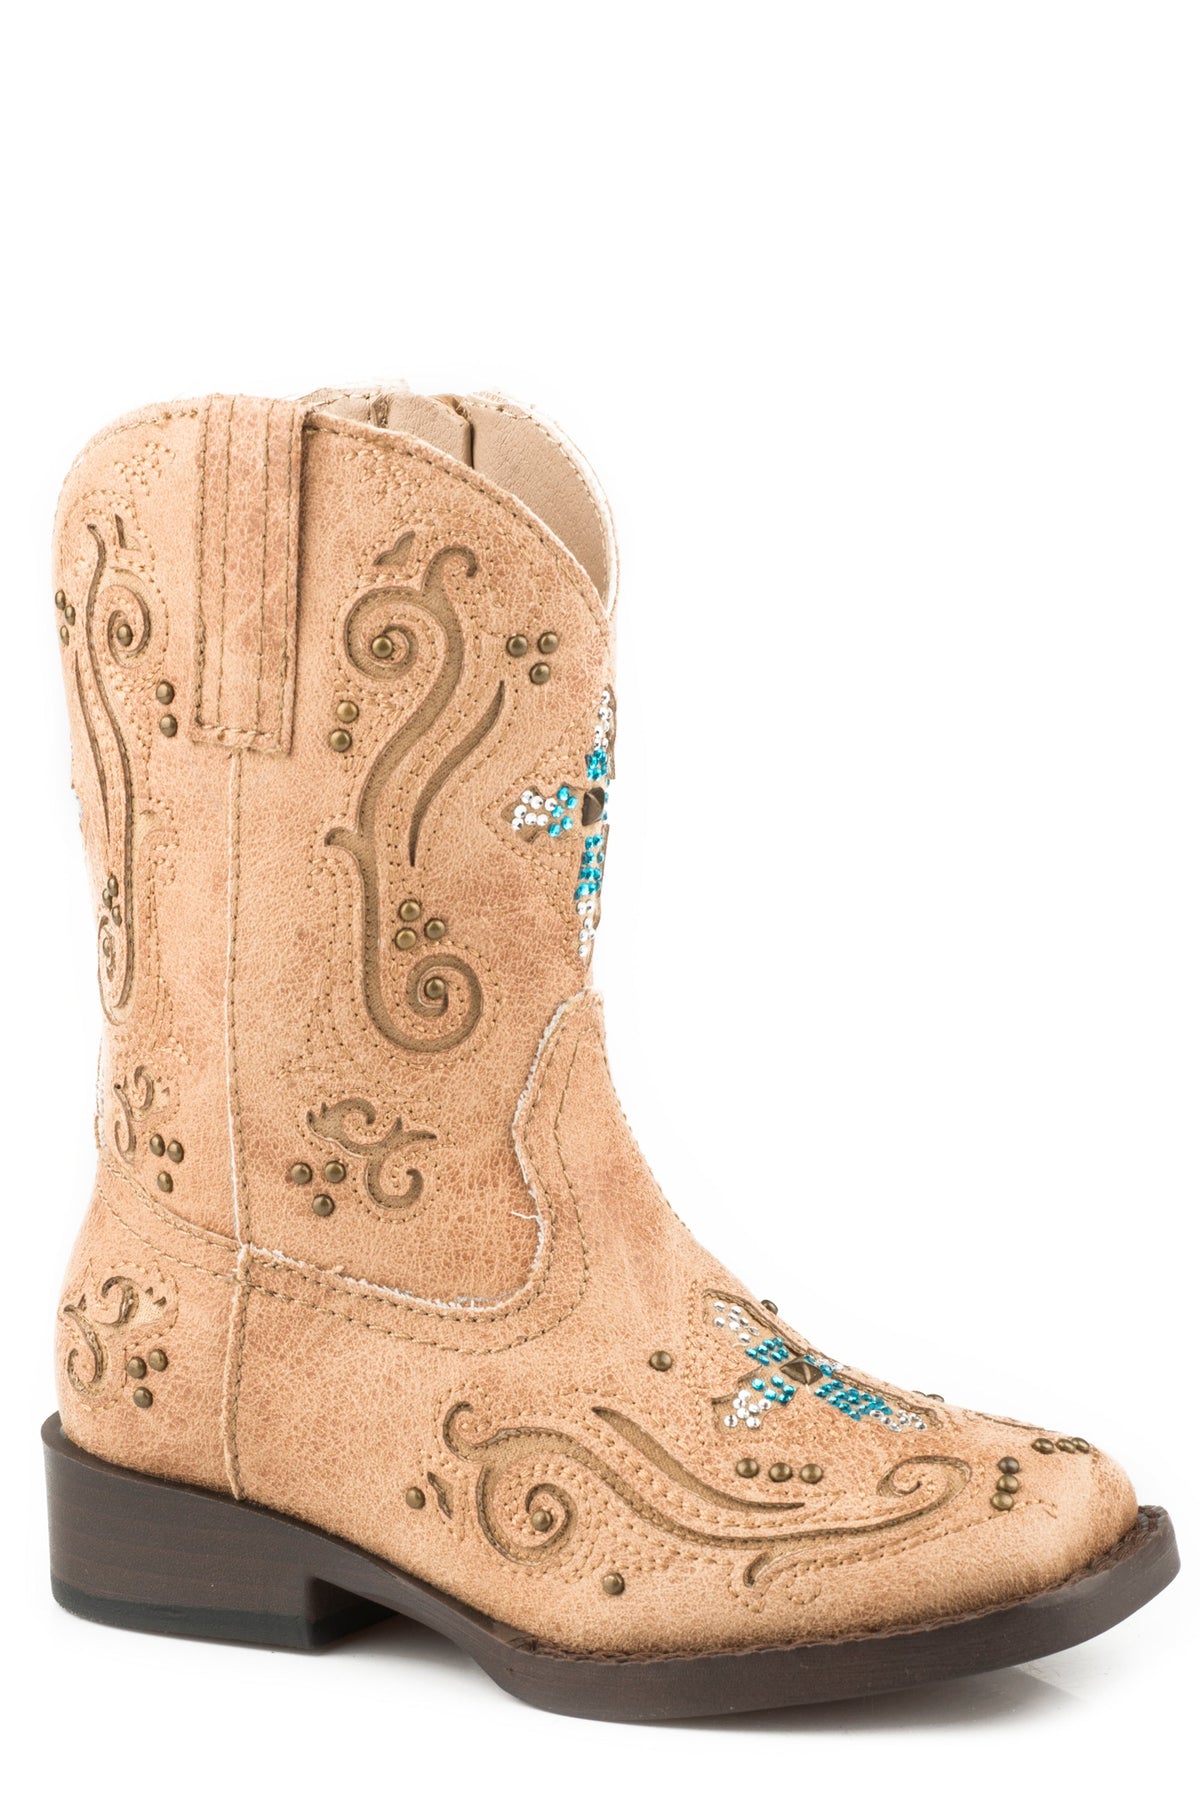 Roper Girls Toddler Tan With Turquoise Cristal Underlay